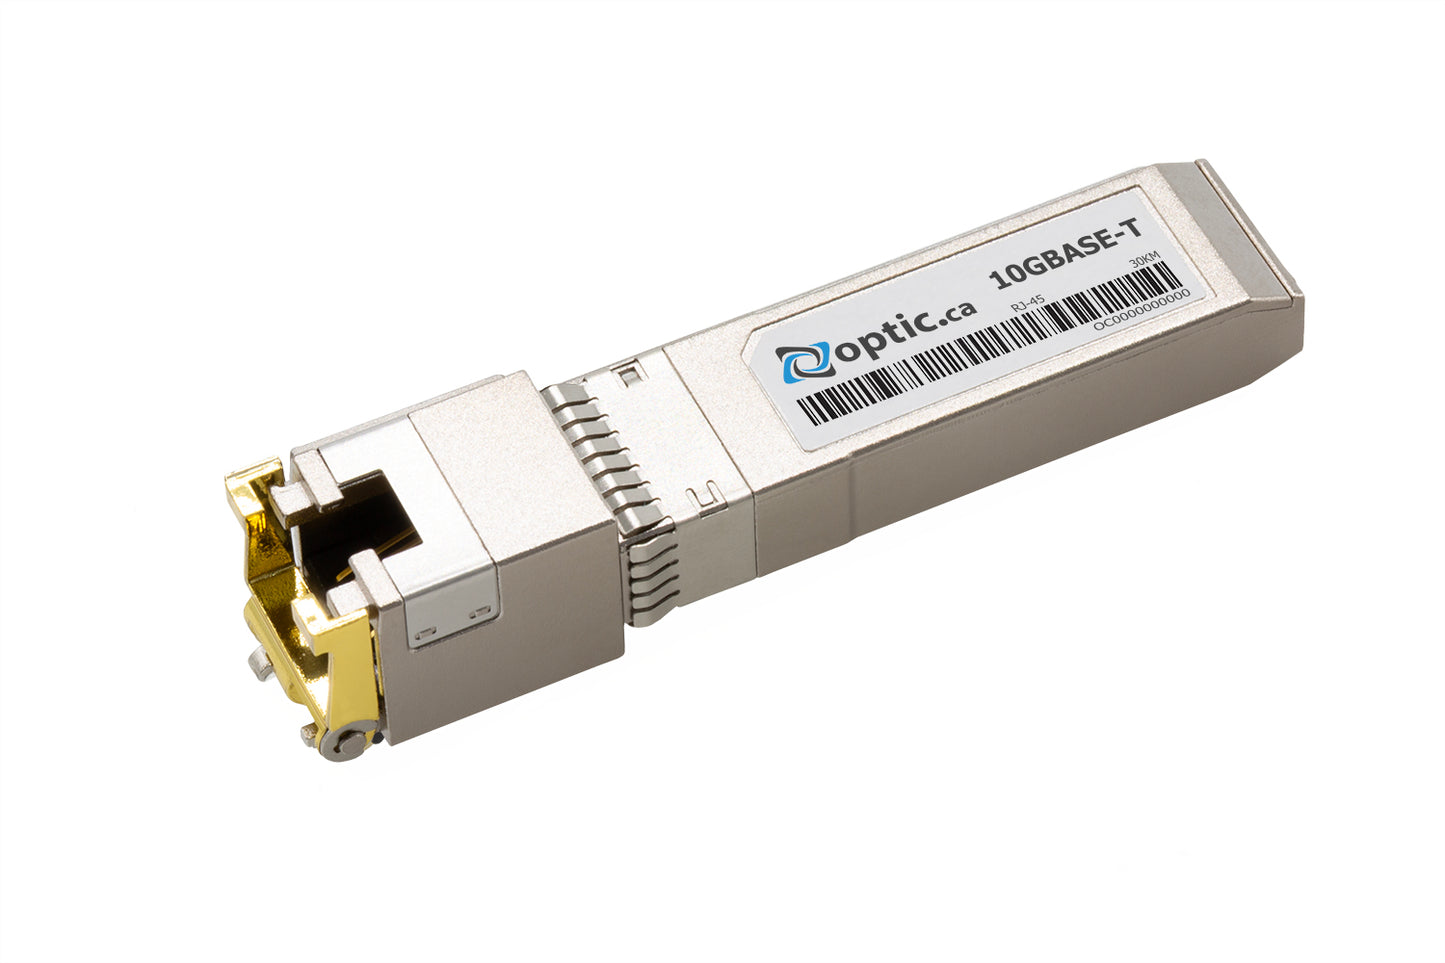 OPTIC.CA - 10GBASE-T SFP+ - 407-BDDG - DELL COMPATIBLE